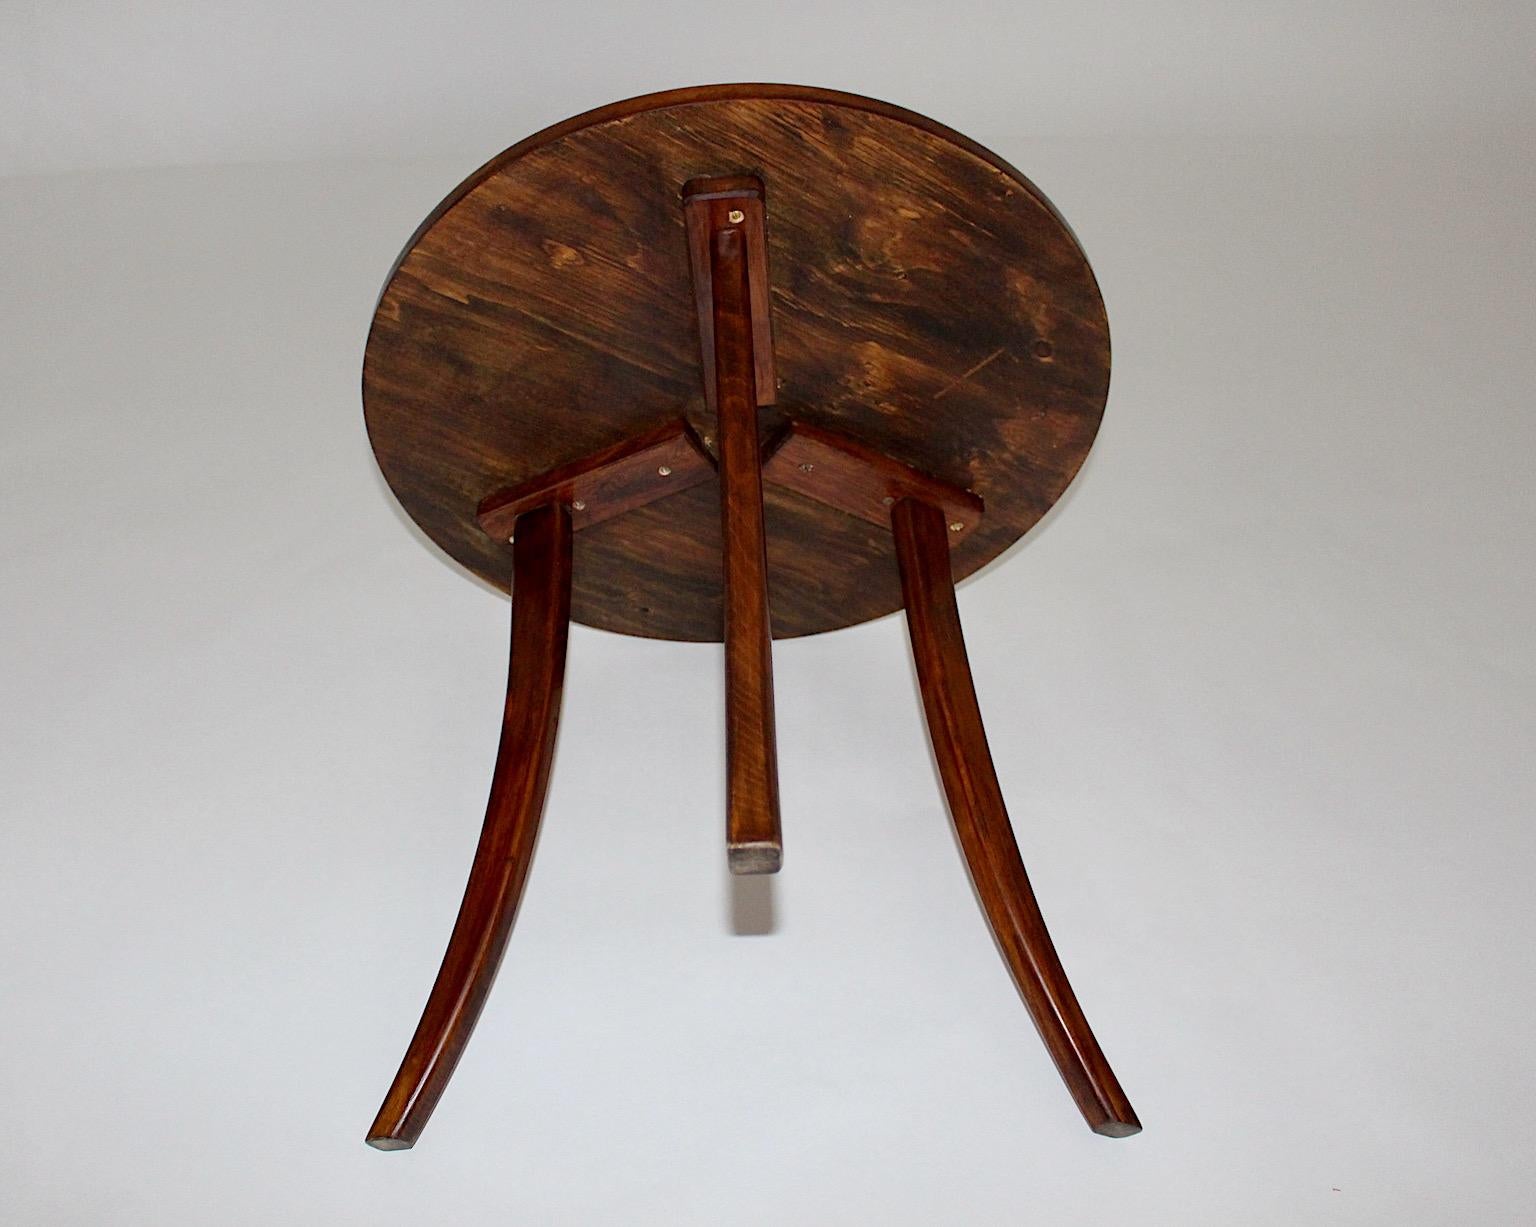 Art Deco Walnut Brown Vintage Coffee Table Side Table Josef Frank, 1930s, Vienna For Sale 4